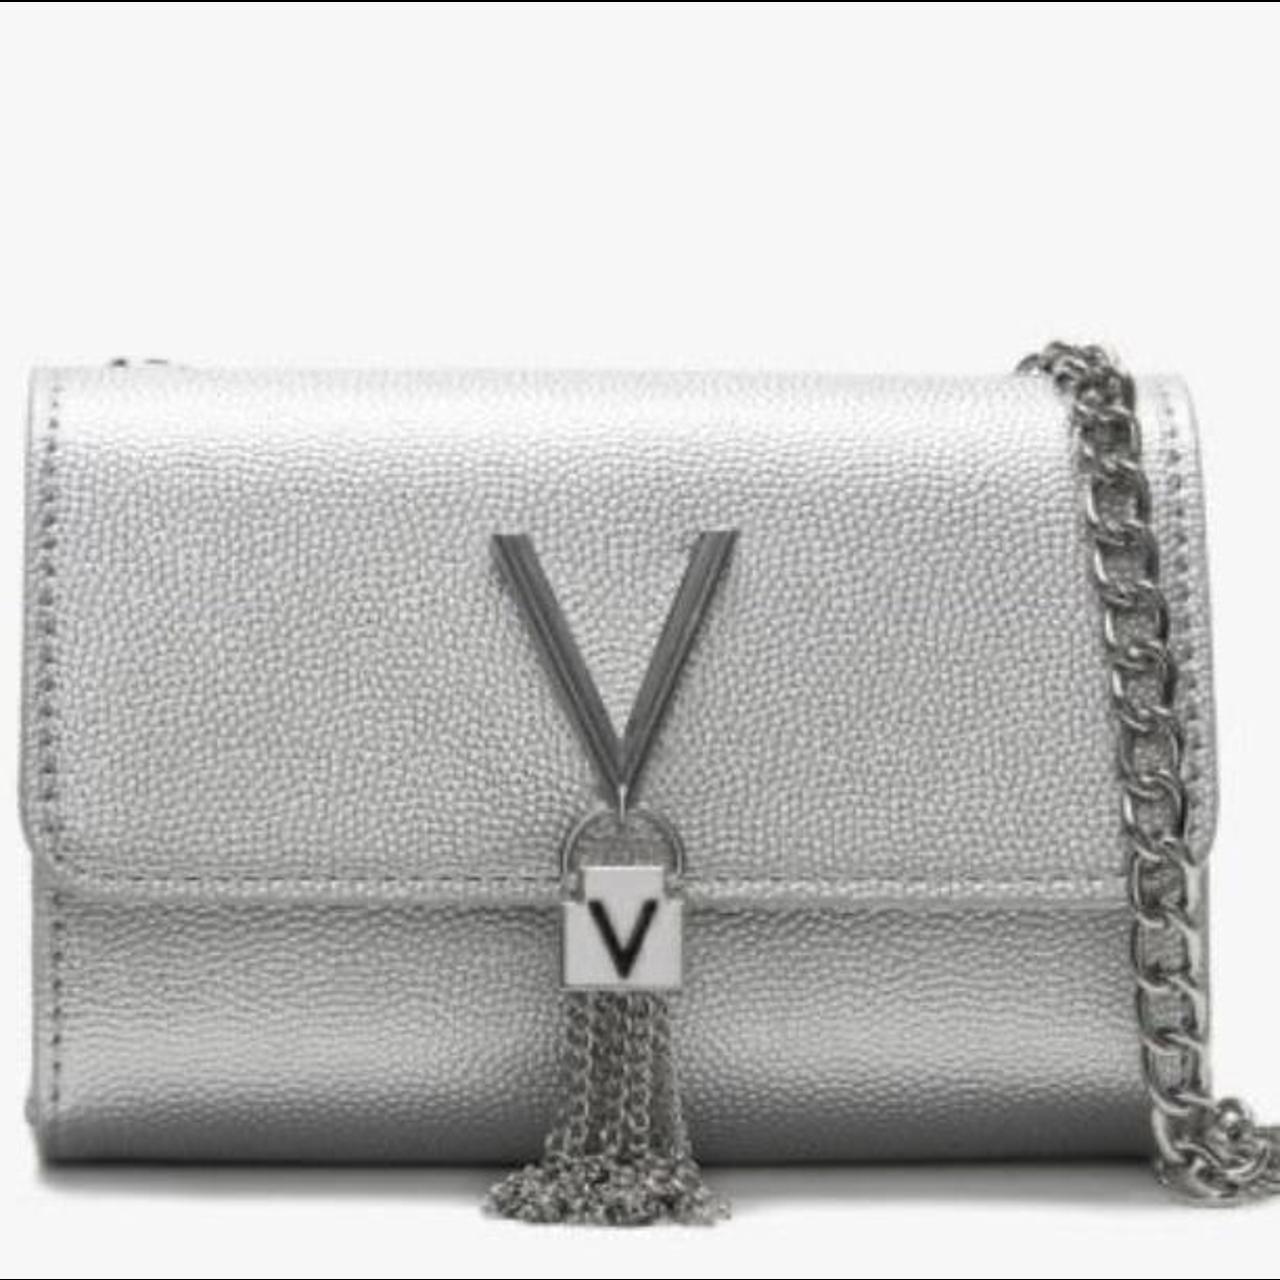 Selling this silver Valentino bag, in perfect... - Depop